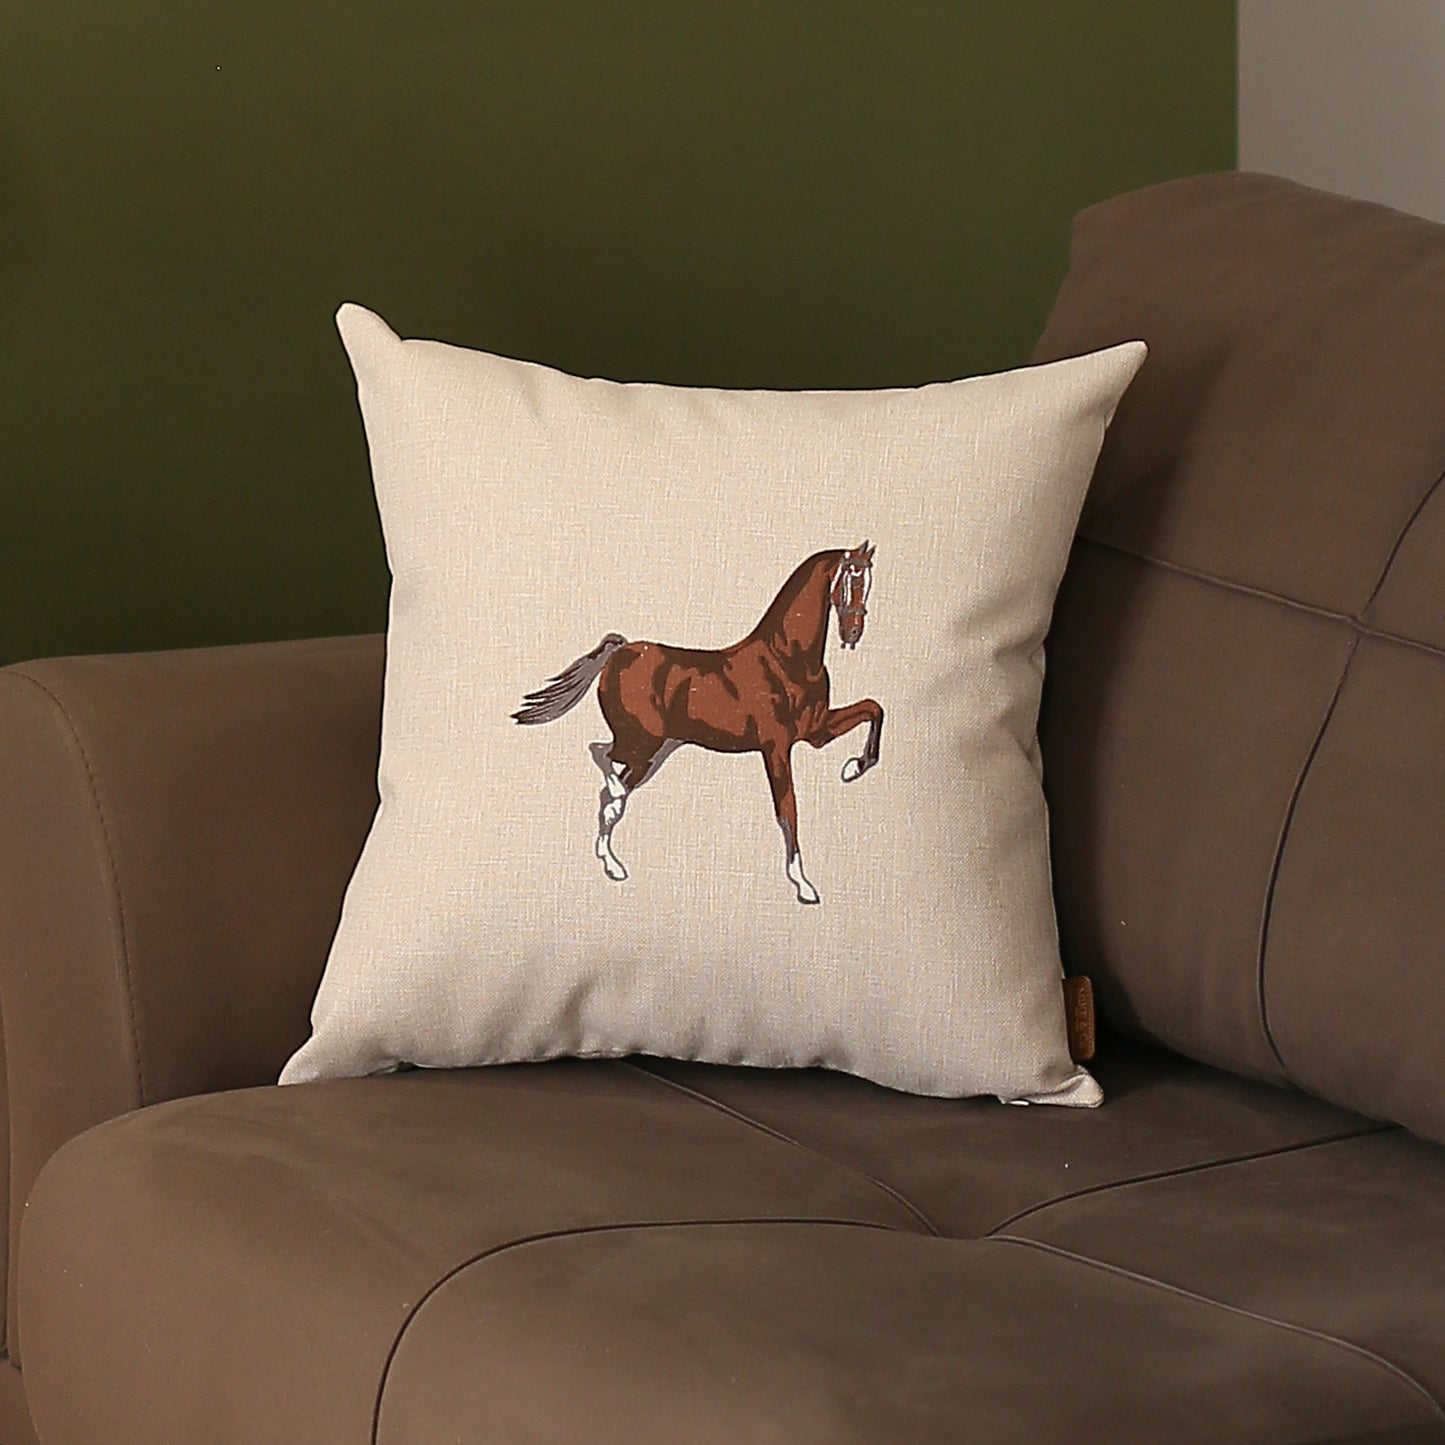 Boho Embroidered Horse Set of 3 Throw Pillow 12" x 20" & 18" x 18" Vegan Faux Leather Solid Beige & Brown for Couch, Bedding